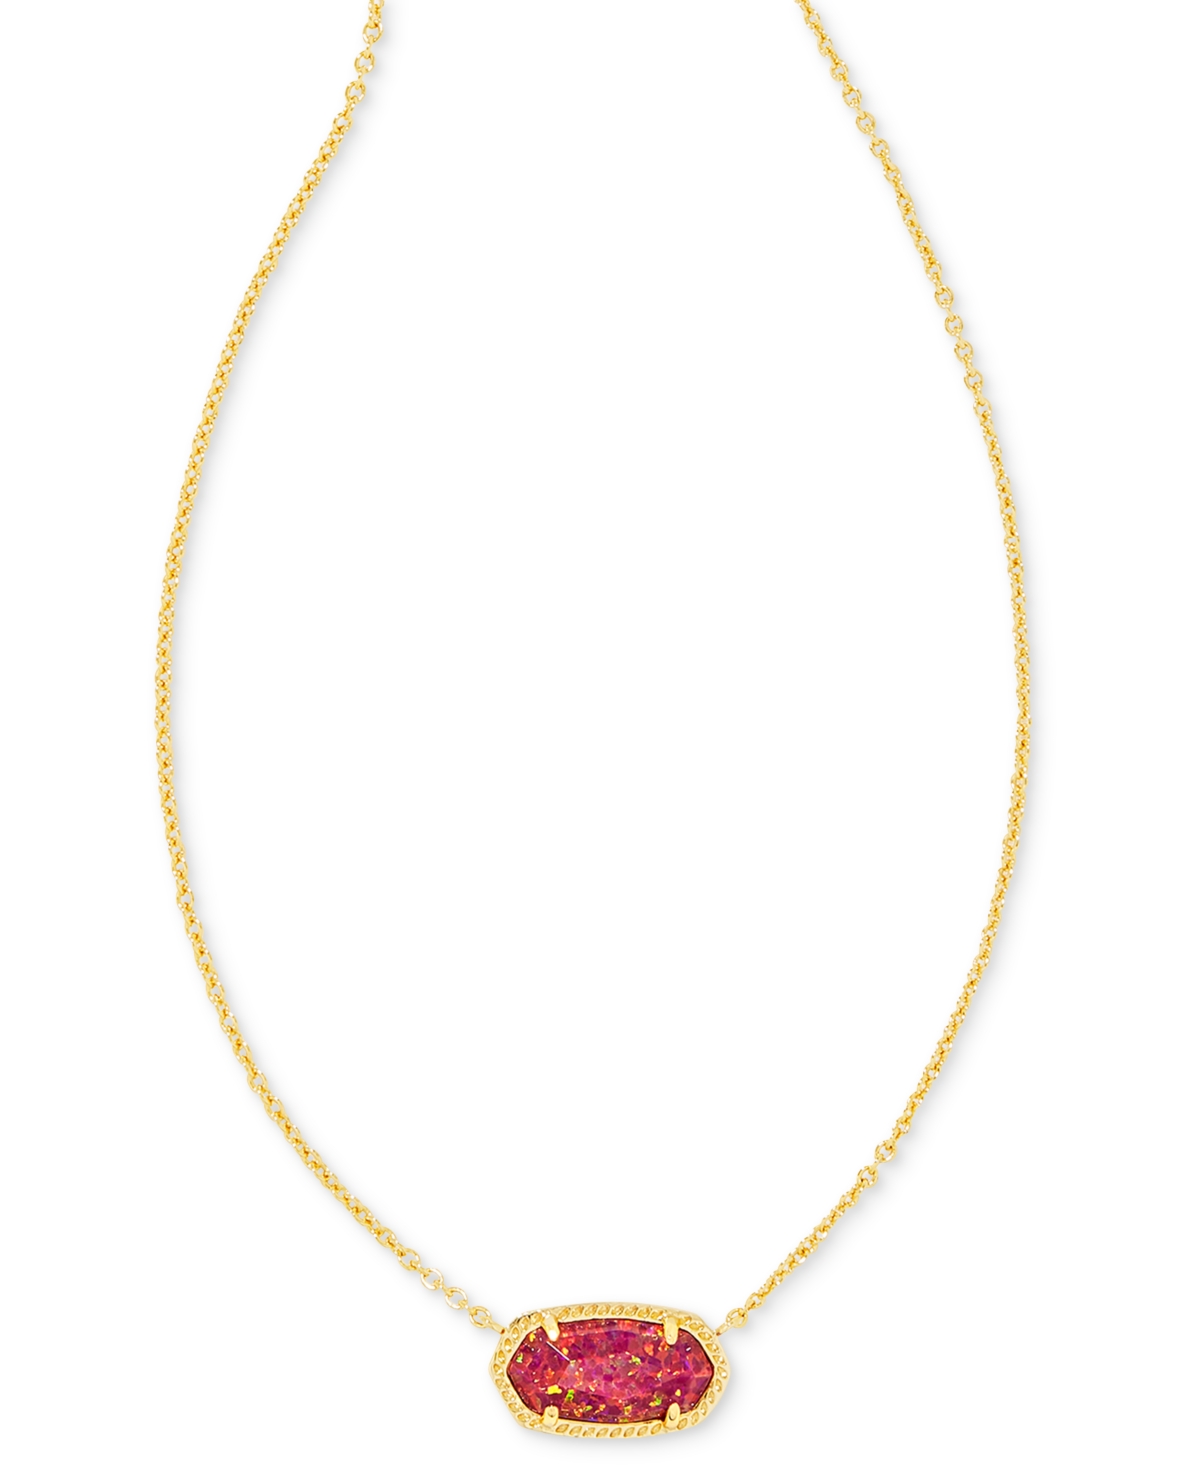 Kendra Scott Elisa Stone Pendant Necklace In 14k Gold Plated, 15-17 In Lt,pas Red